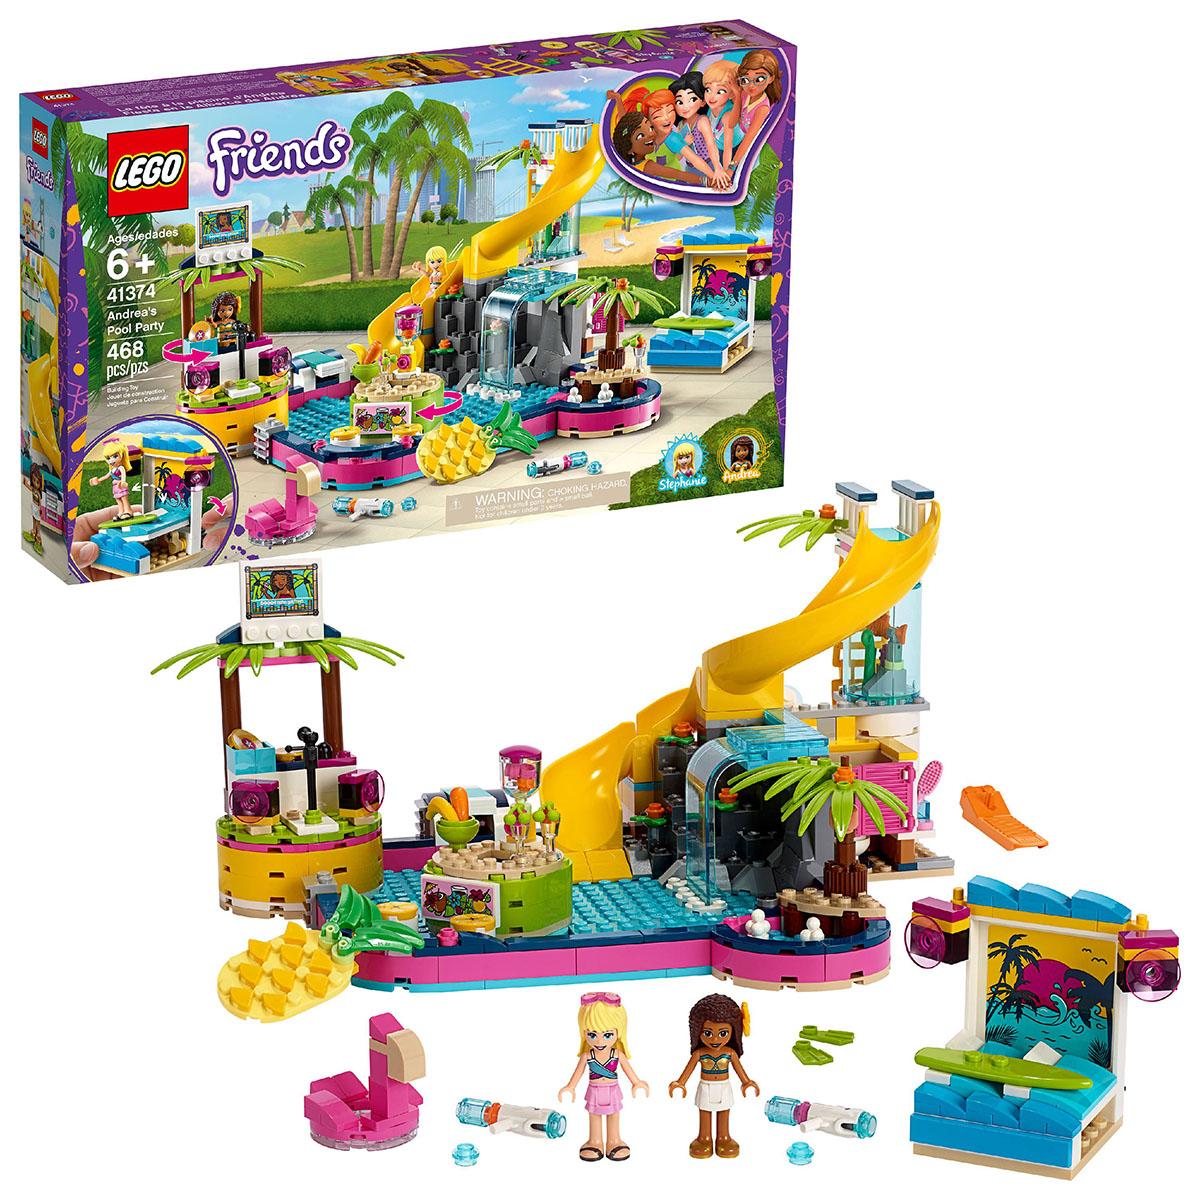 468-Piece LEGO Friends Andrea's Pool Party Building Set for $34.97